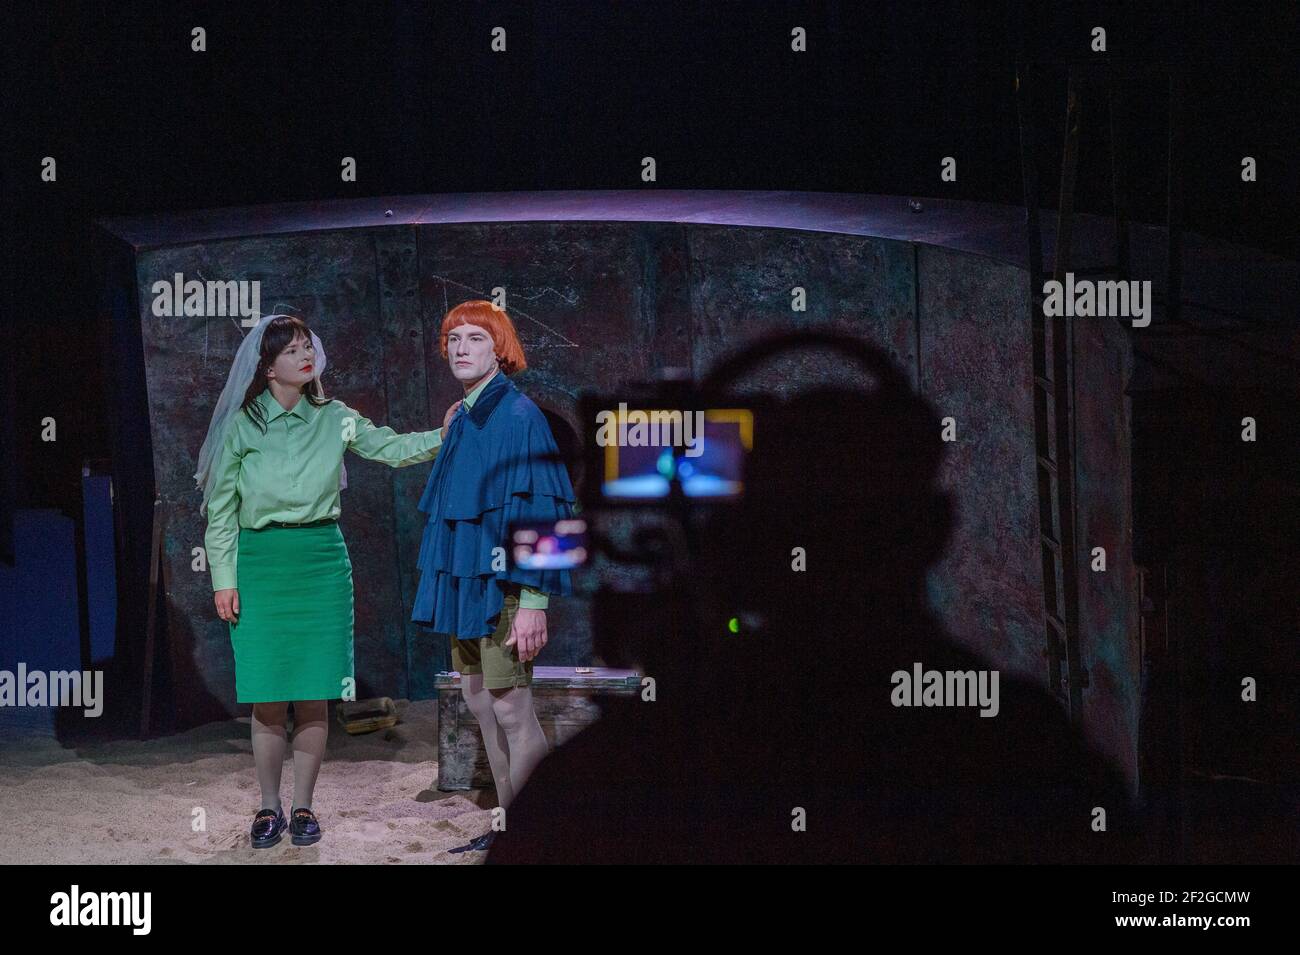 12 March 2021, Saxony-Anhalt, Magdeburg: Freda Winter (l) alias Elke and Richard Barborka (r) as Hauke Haien rehearse a scene from the play 'Der Schimmelreiter' at the Puppentheater Magdeburg. In its series of livestreams, the Puppentheater Magdeburg is performing a play for adults for the first time this weekend. The focus is on the ambitious and egotistical Hauke Haien, who rises from humble beginnings to become a dike count. It is the fifth play to be shown via livestream. According to the theatre, more than 3200 tickets for the livestreams have been sold so far. Photo: Klaus-Dietmar Gabber Stock Photo